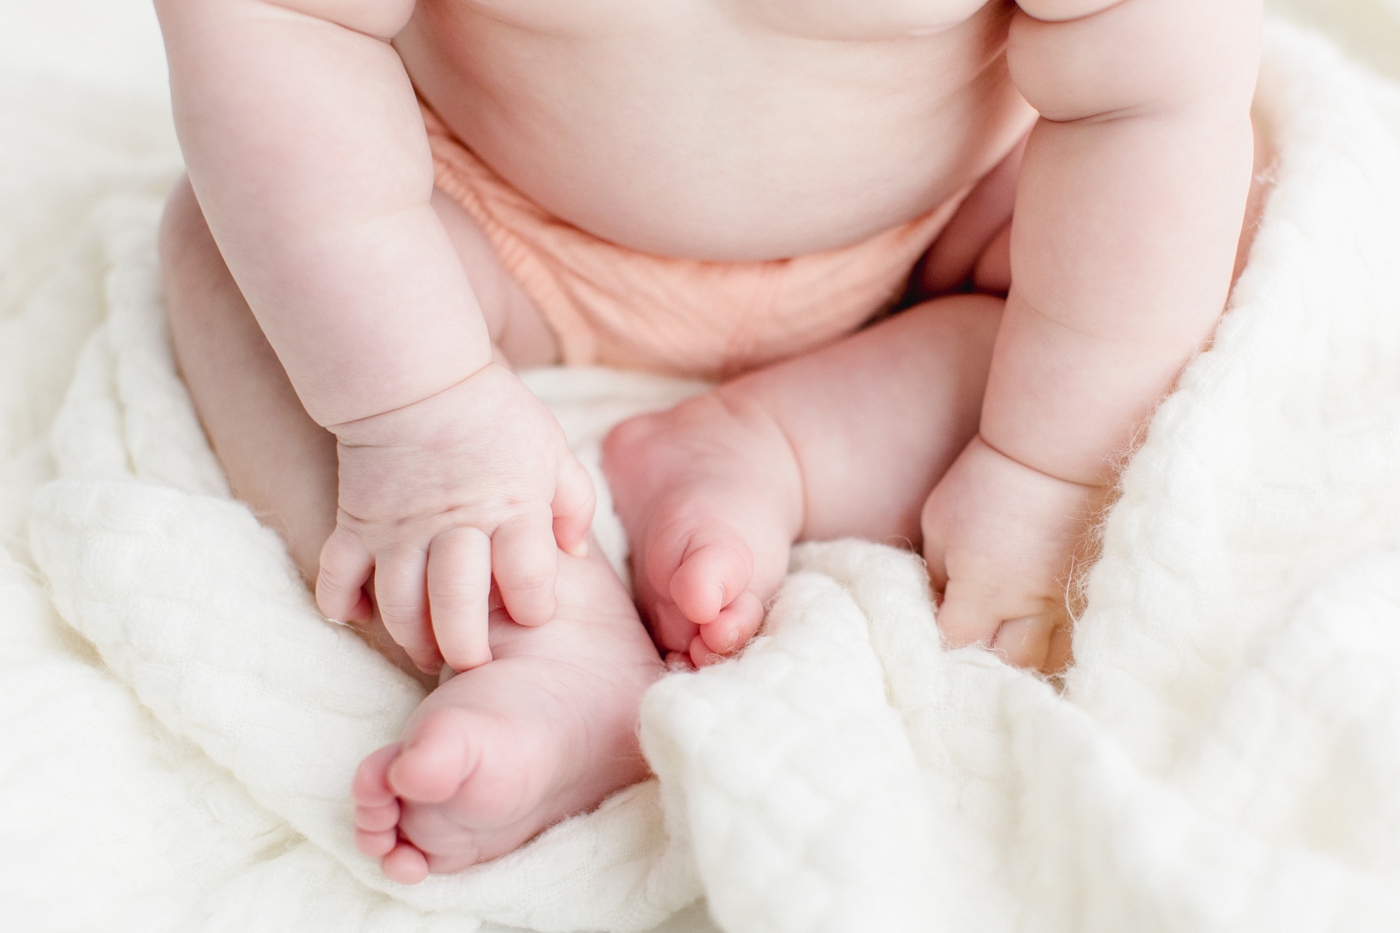 Detail photo of baby girl's hands and feet. Photo by Sana Ahmed Photography.